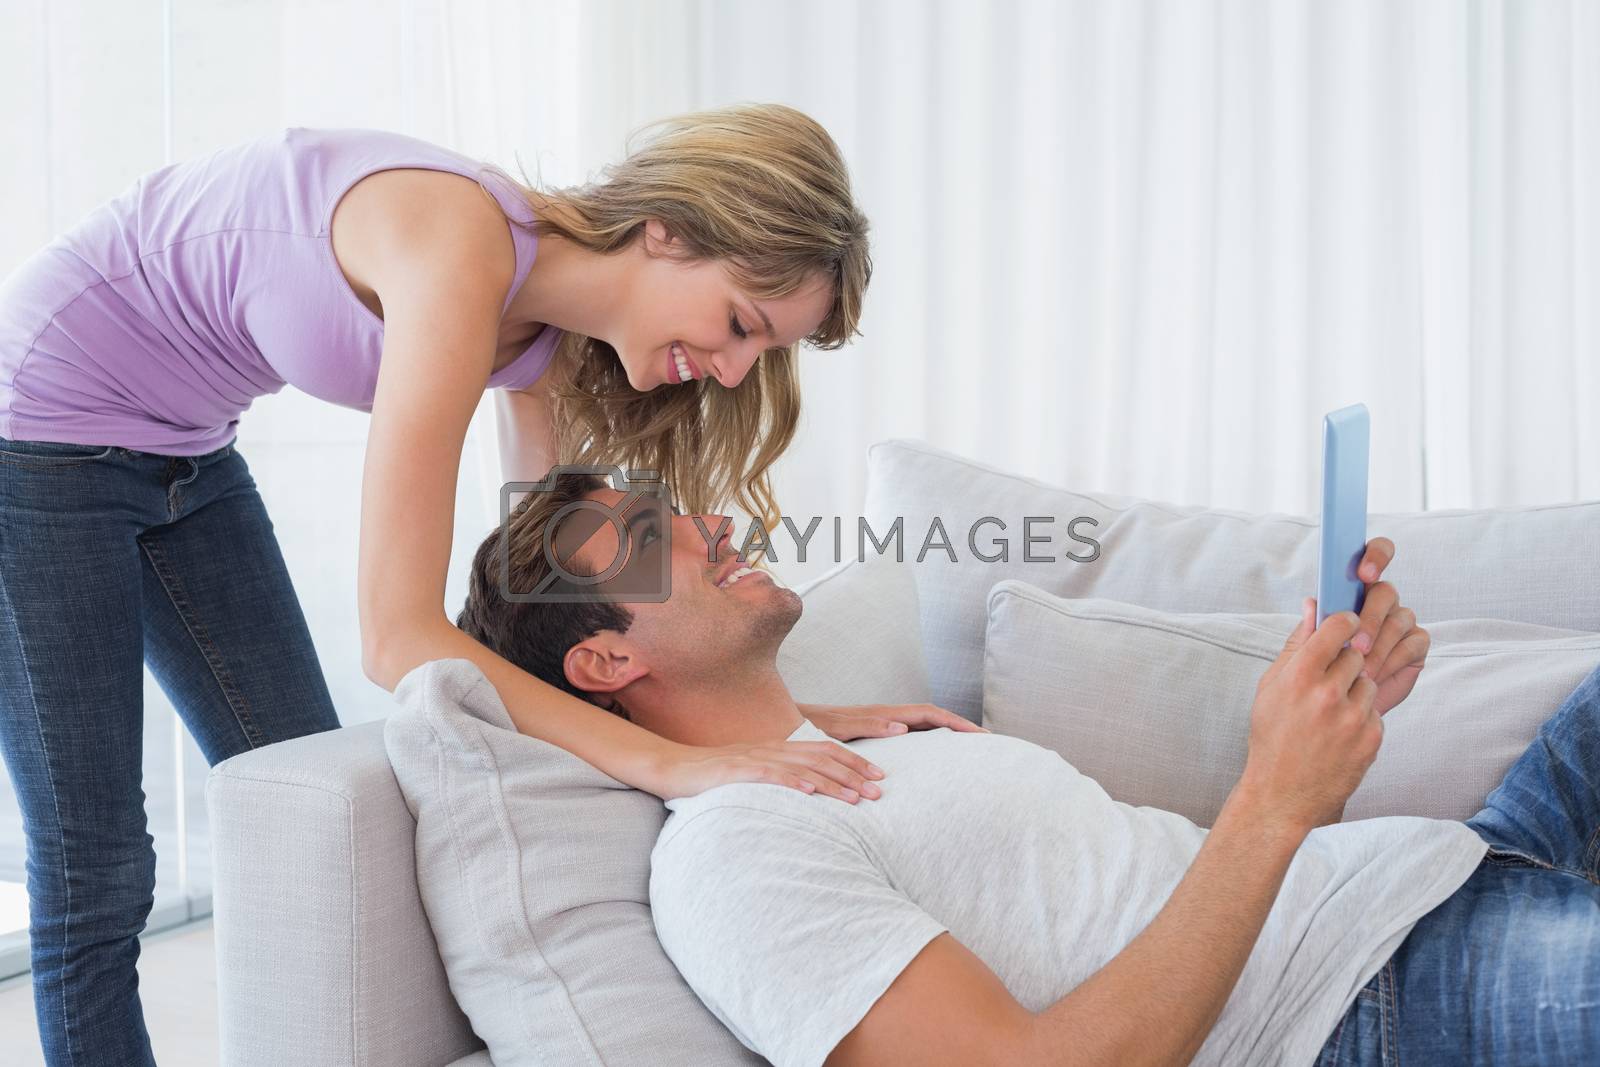 Royalty free image of Woman with man using digital tablet by Wavebreakmedia